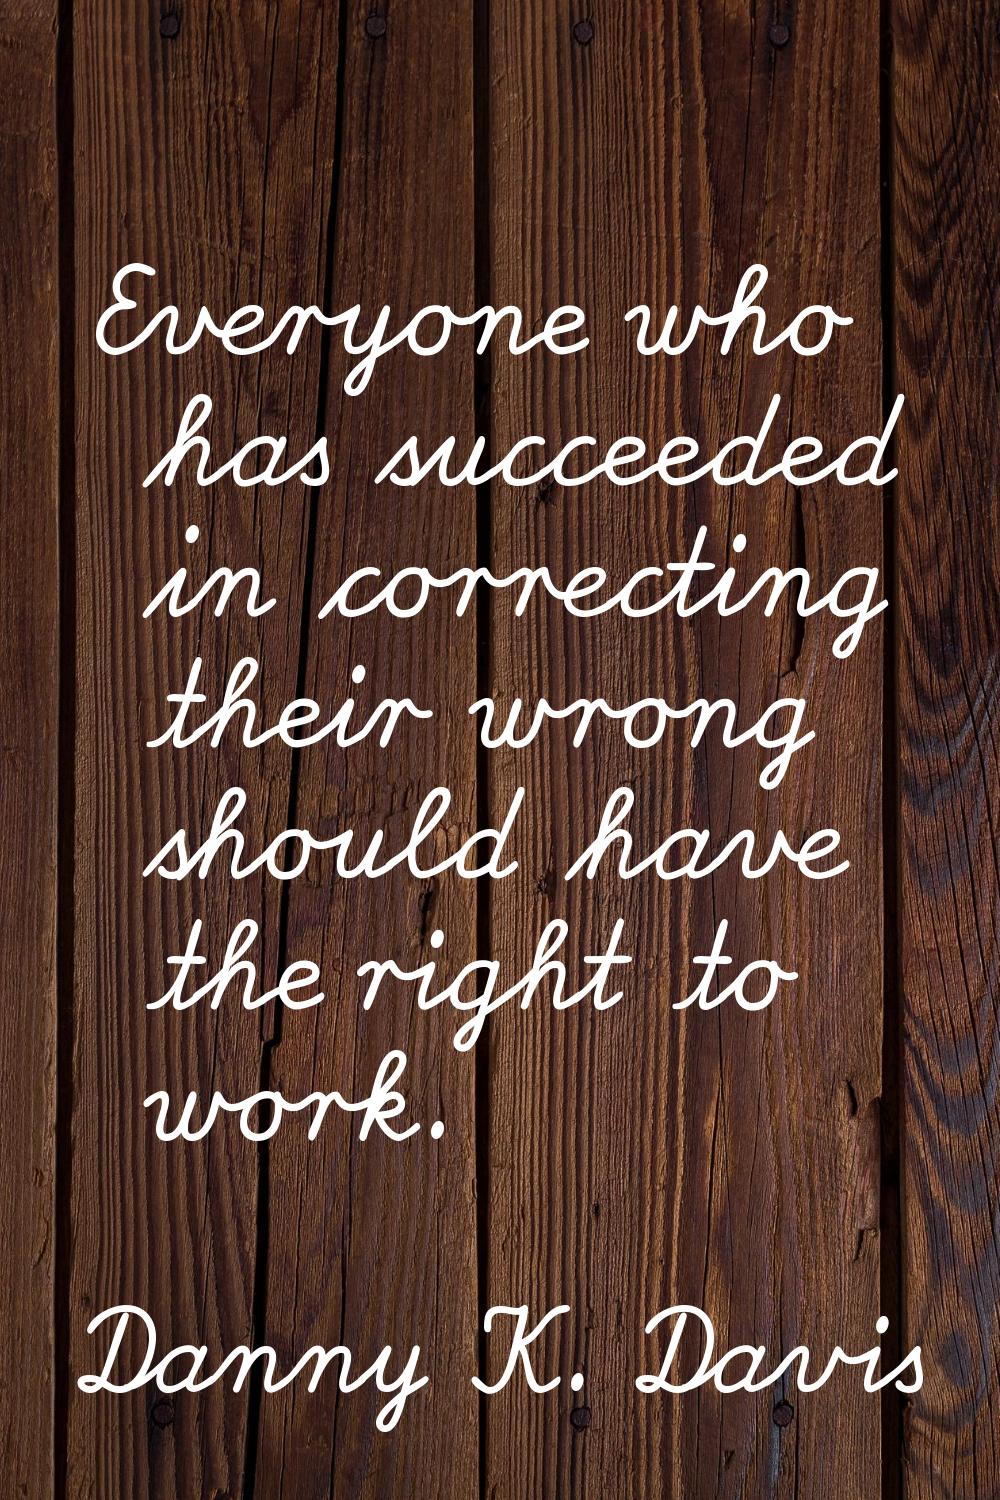 Everyone who has succeeded in correcting their wrong should have the right to work.